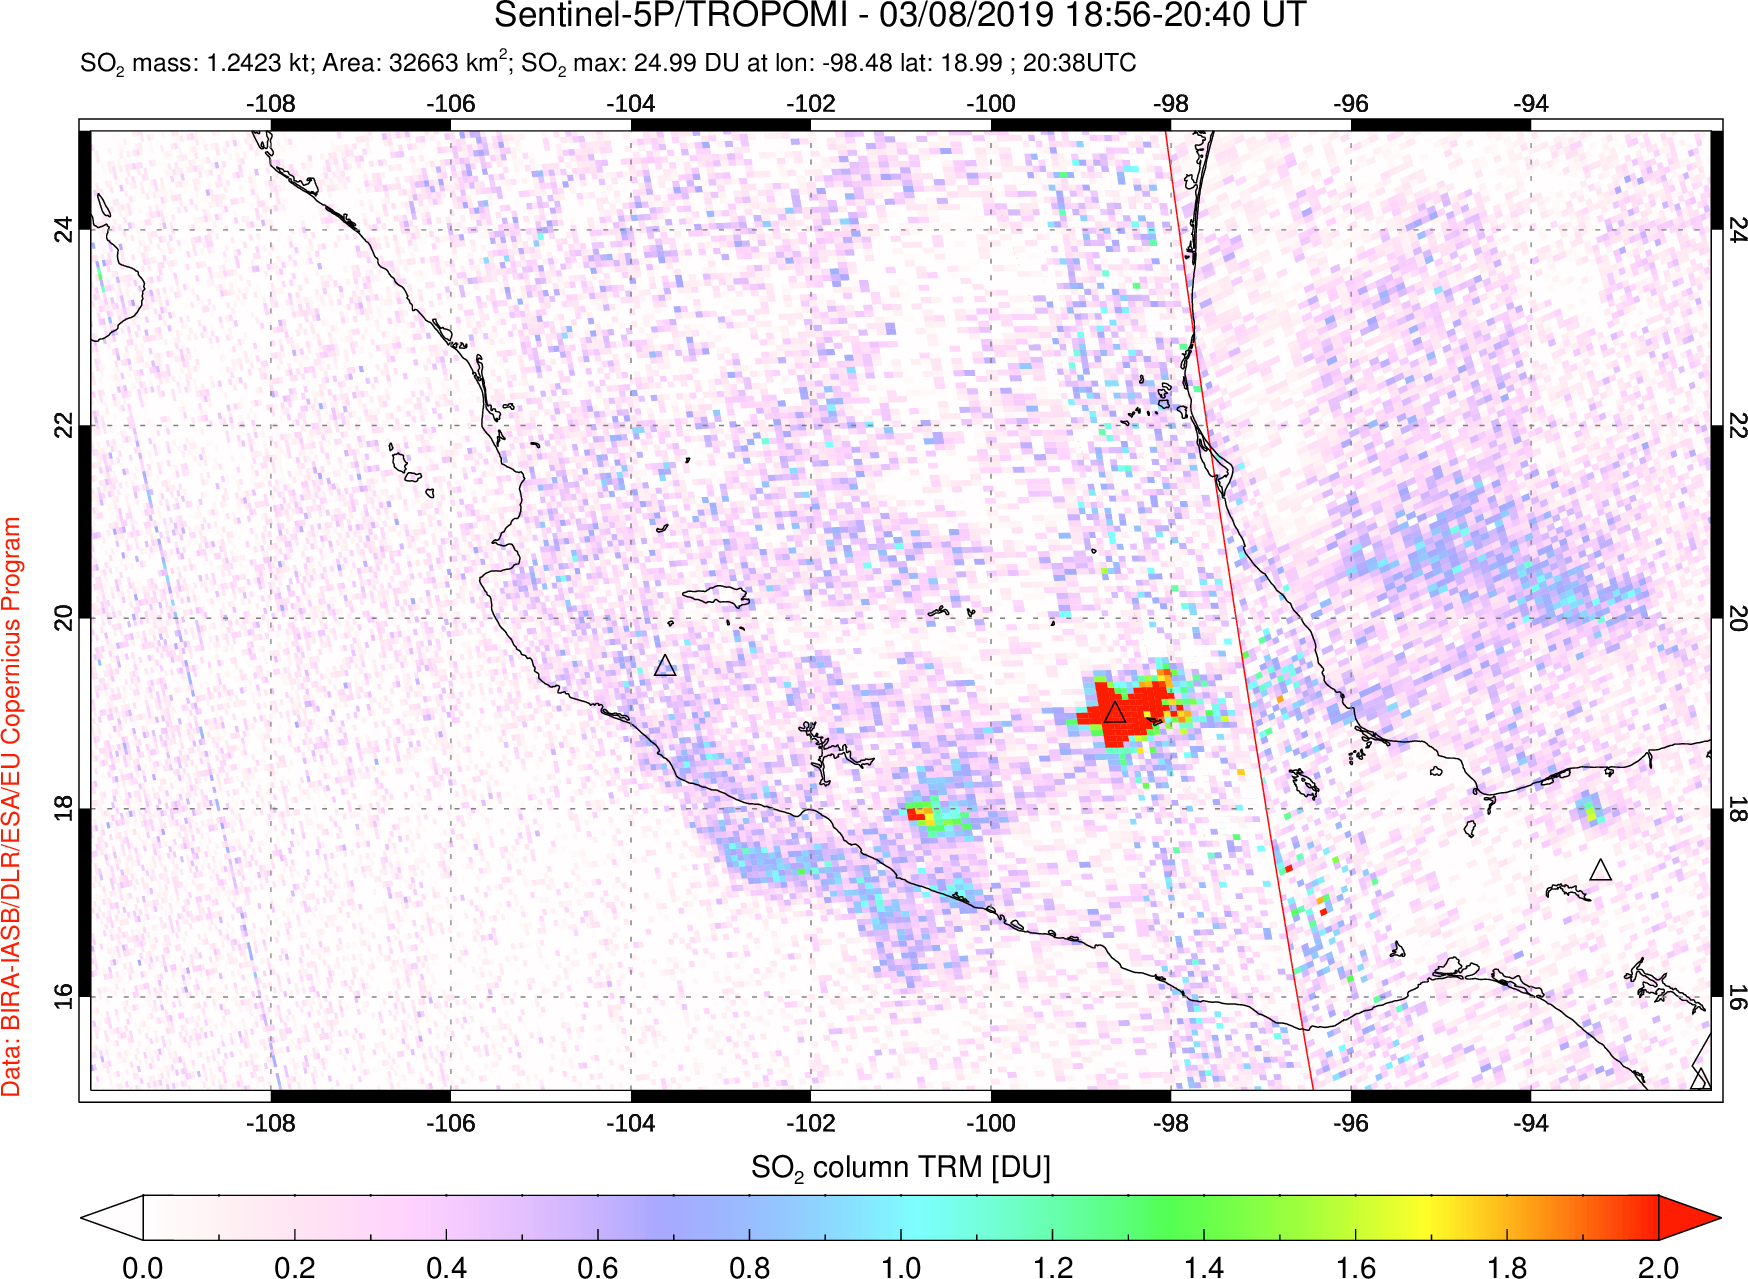 A sulfur dioxide image over Mexico on Mar 08, 2019.